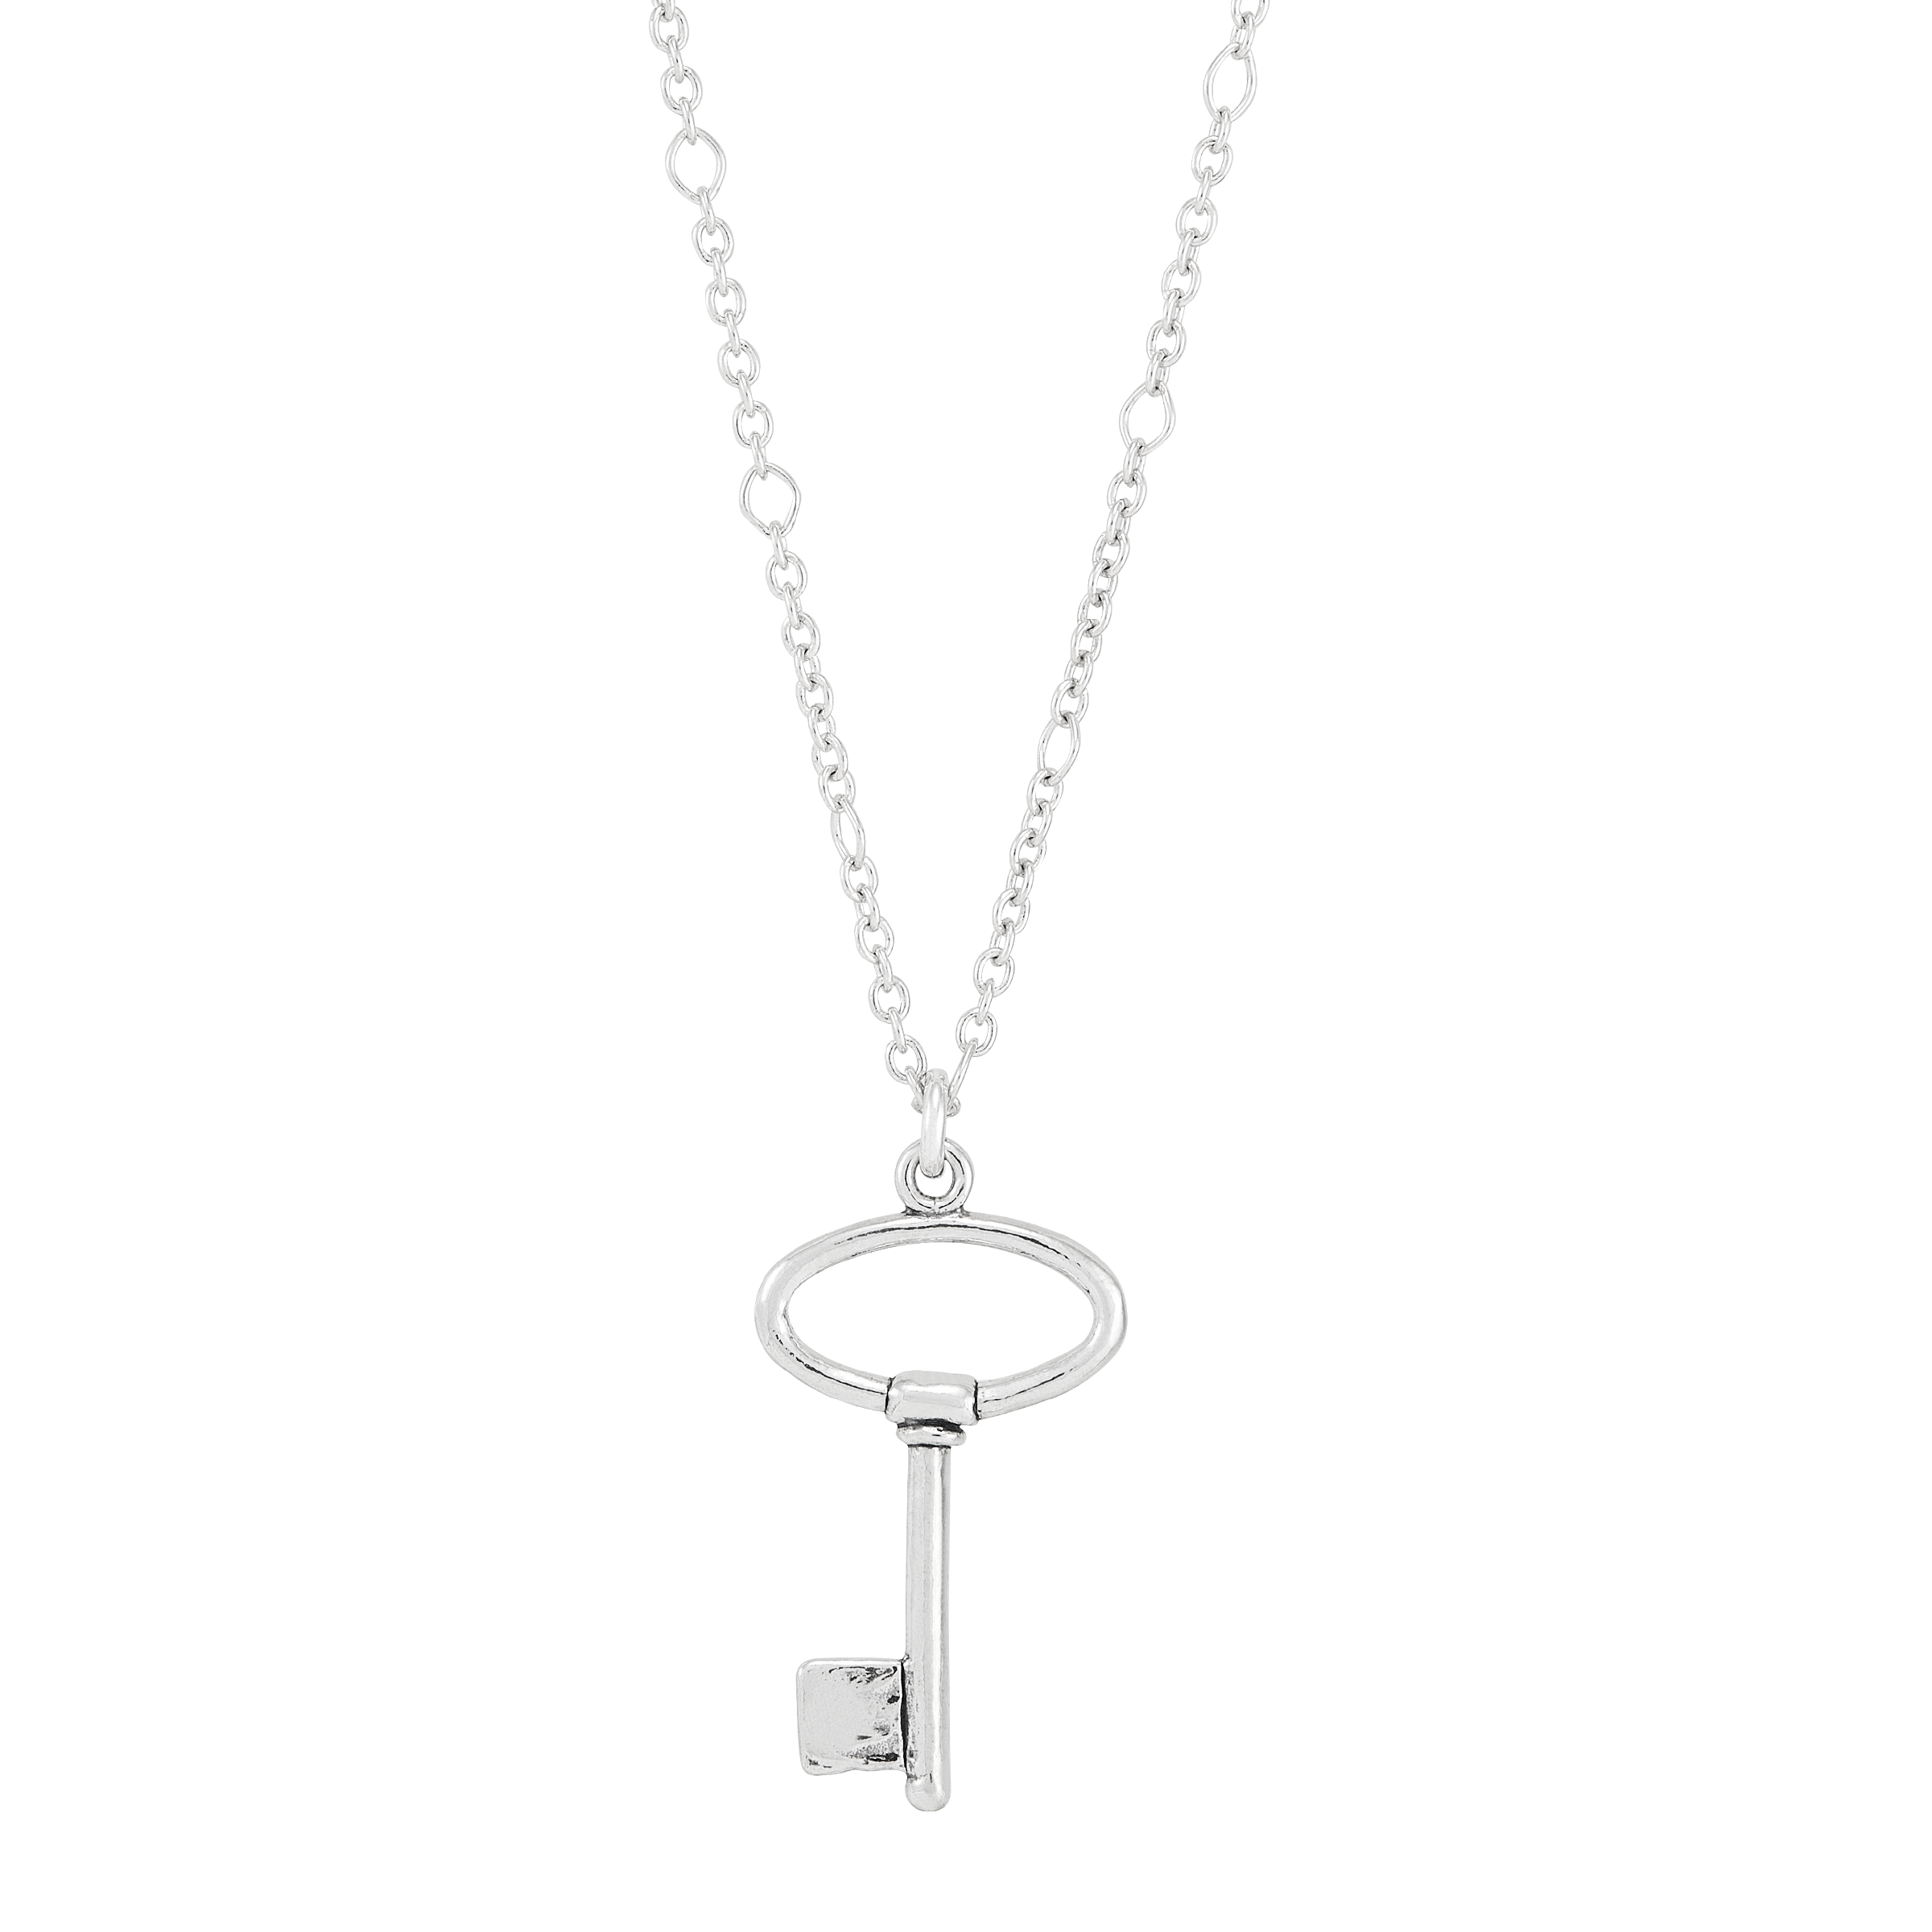 Silpada 'Key to Your Heart' Sterling Silver Pendant Necklace, 18 + 2